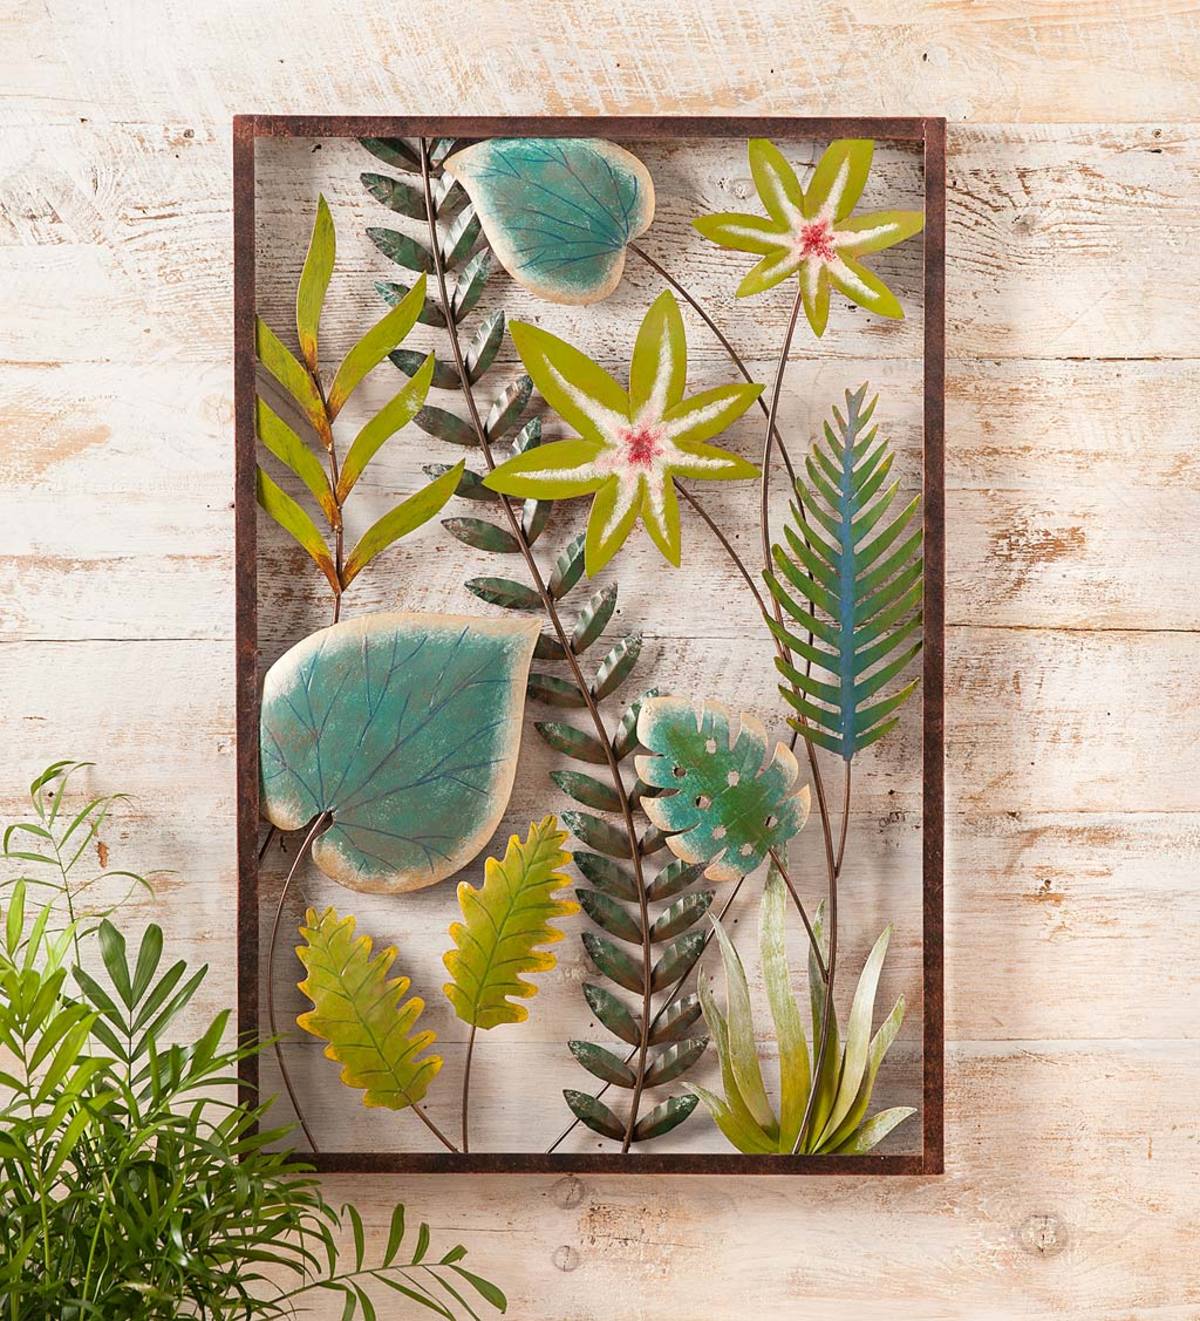 Handcrafted Colorful Leaves Metal Wall Art